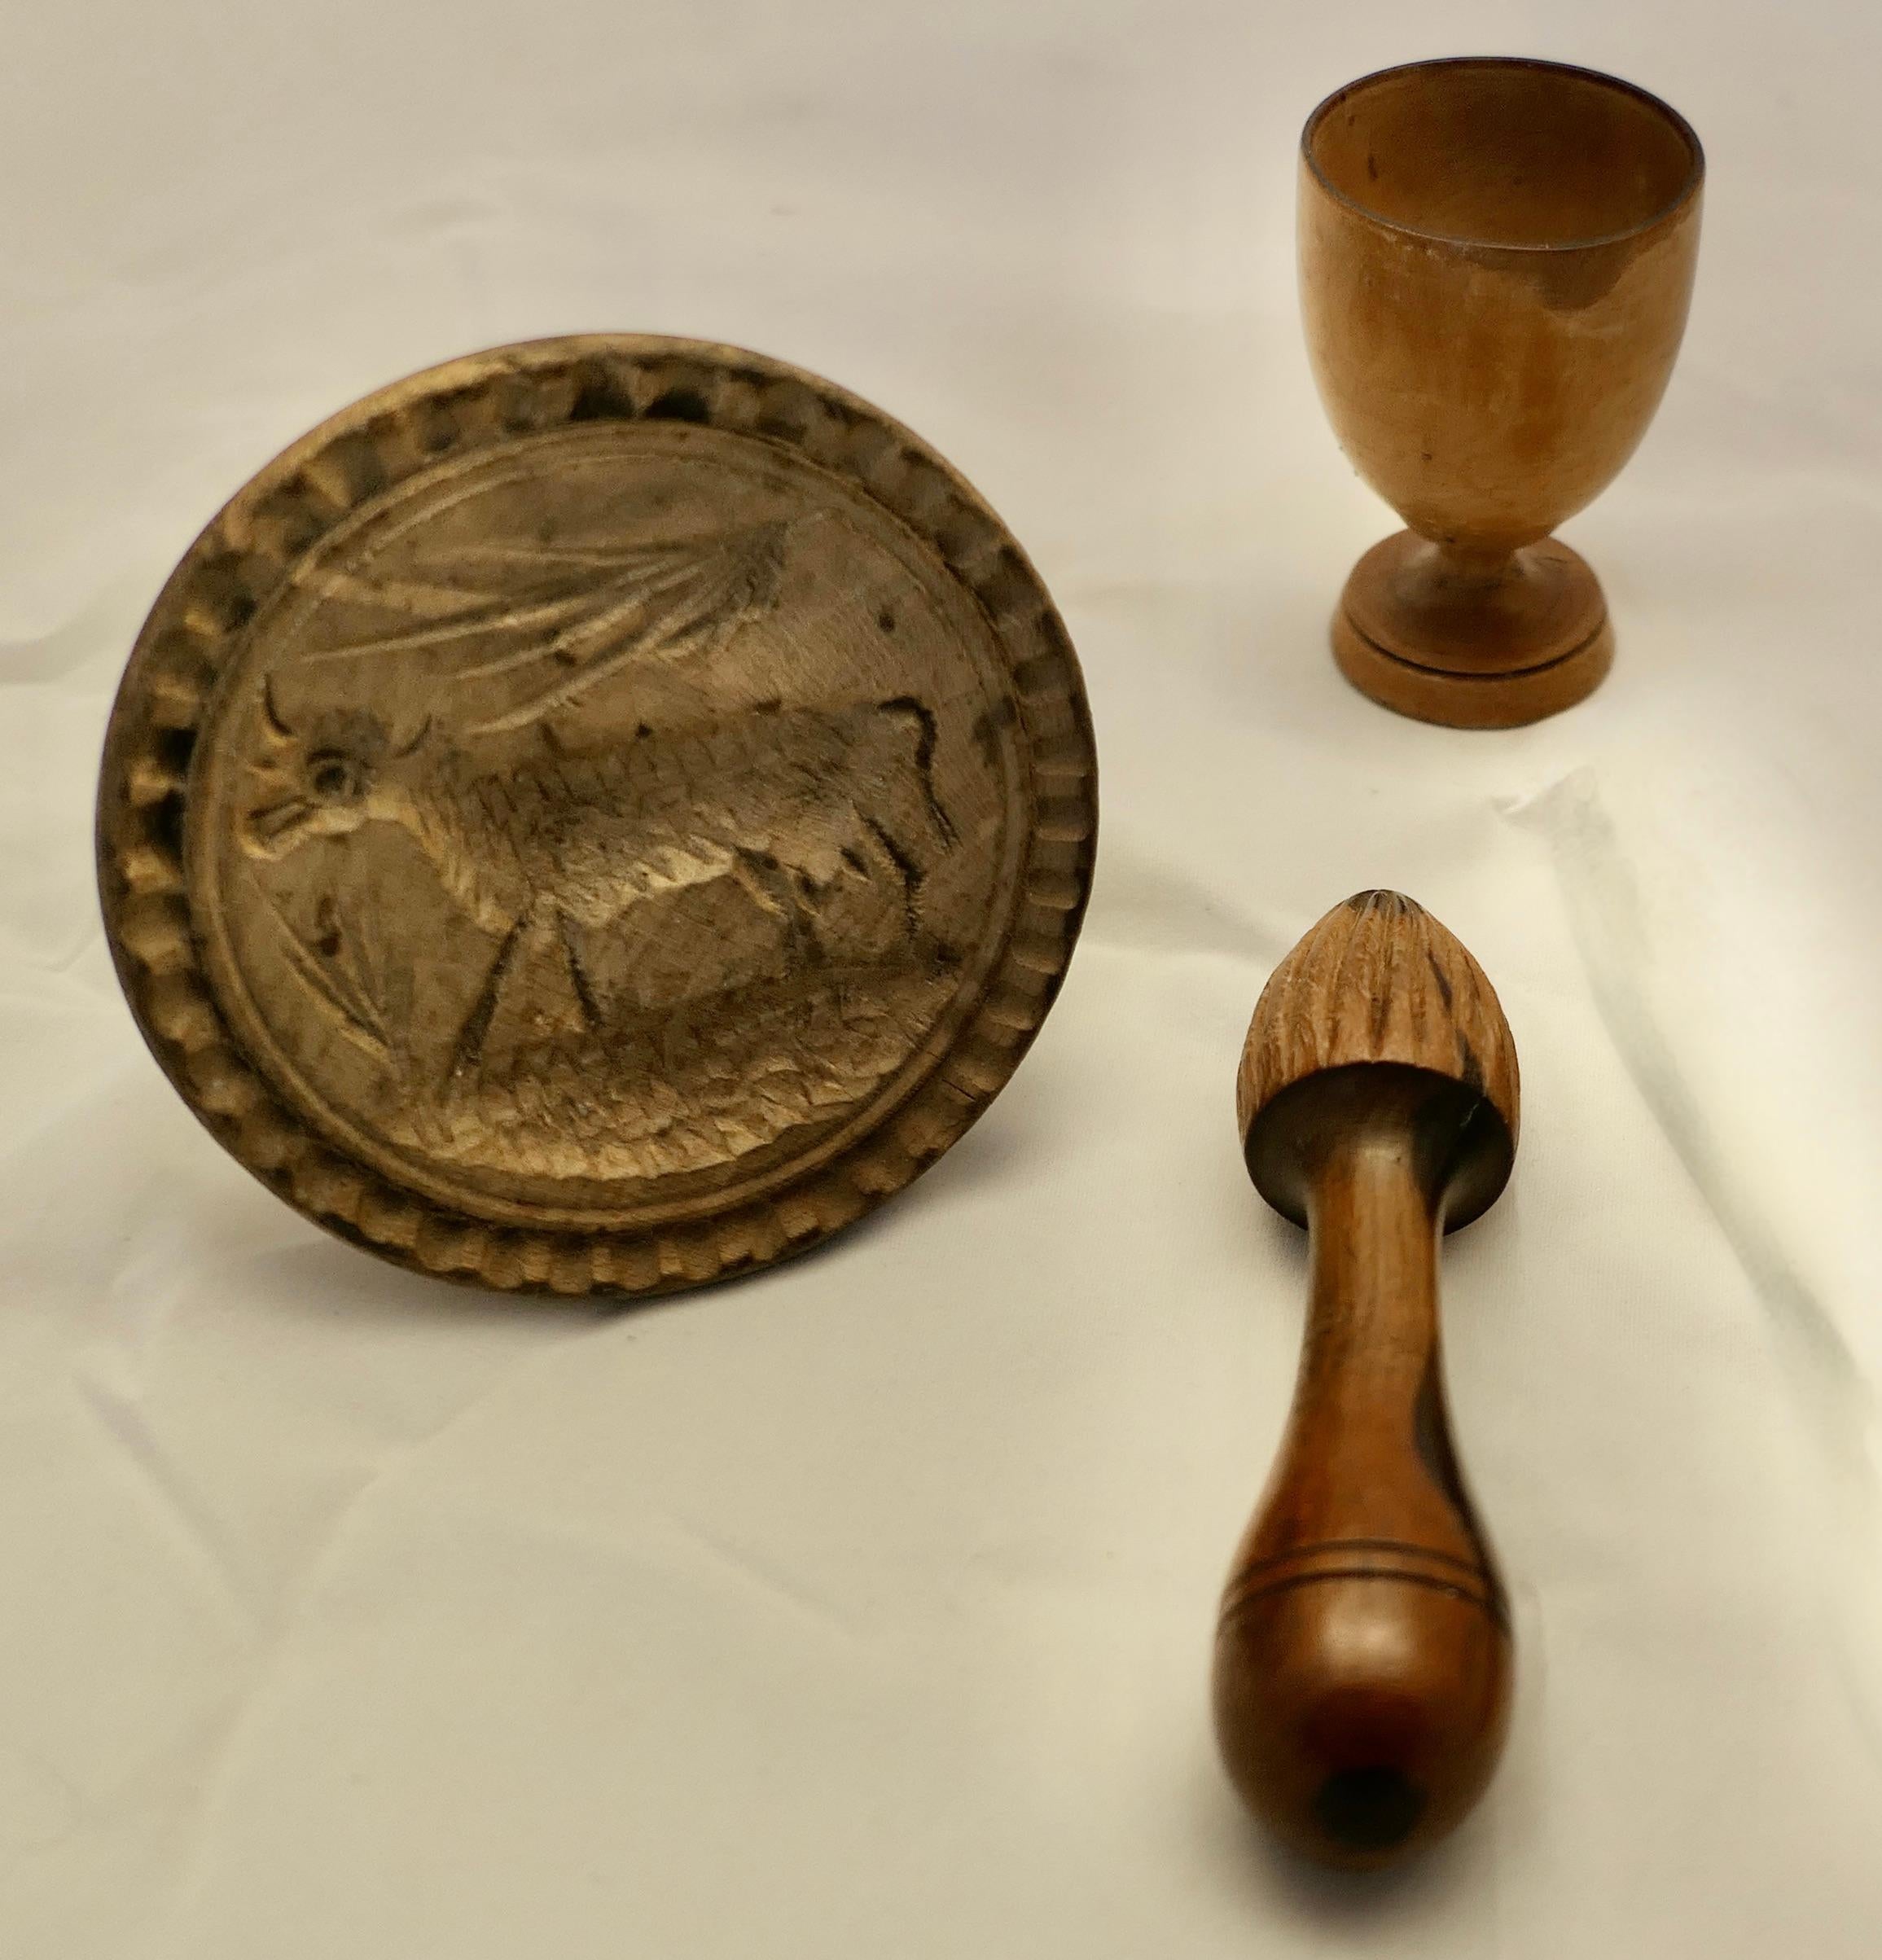 Collection of Treen Kitchenalia, Butter Marker

This is a great little Collection of Treen Kitchenalia, a Butter Marker, this has a naive cow carving, a lemon squeezer and a turned sycamore egg cup

A good set for the collector, a bit of historical